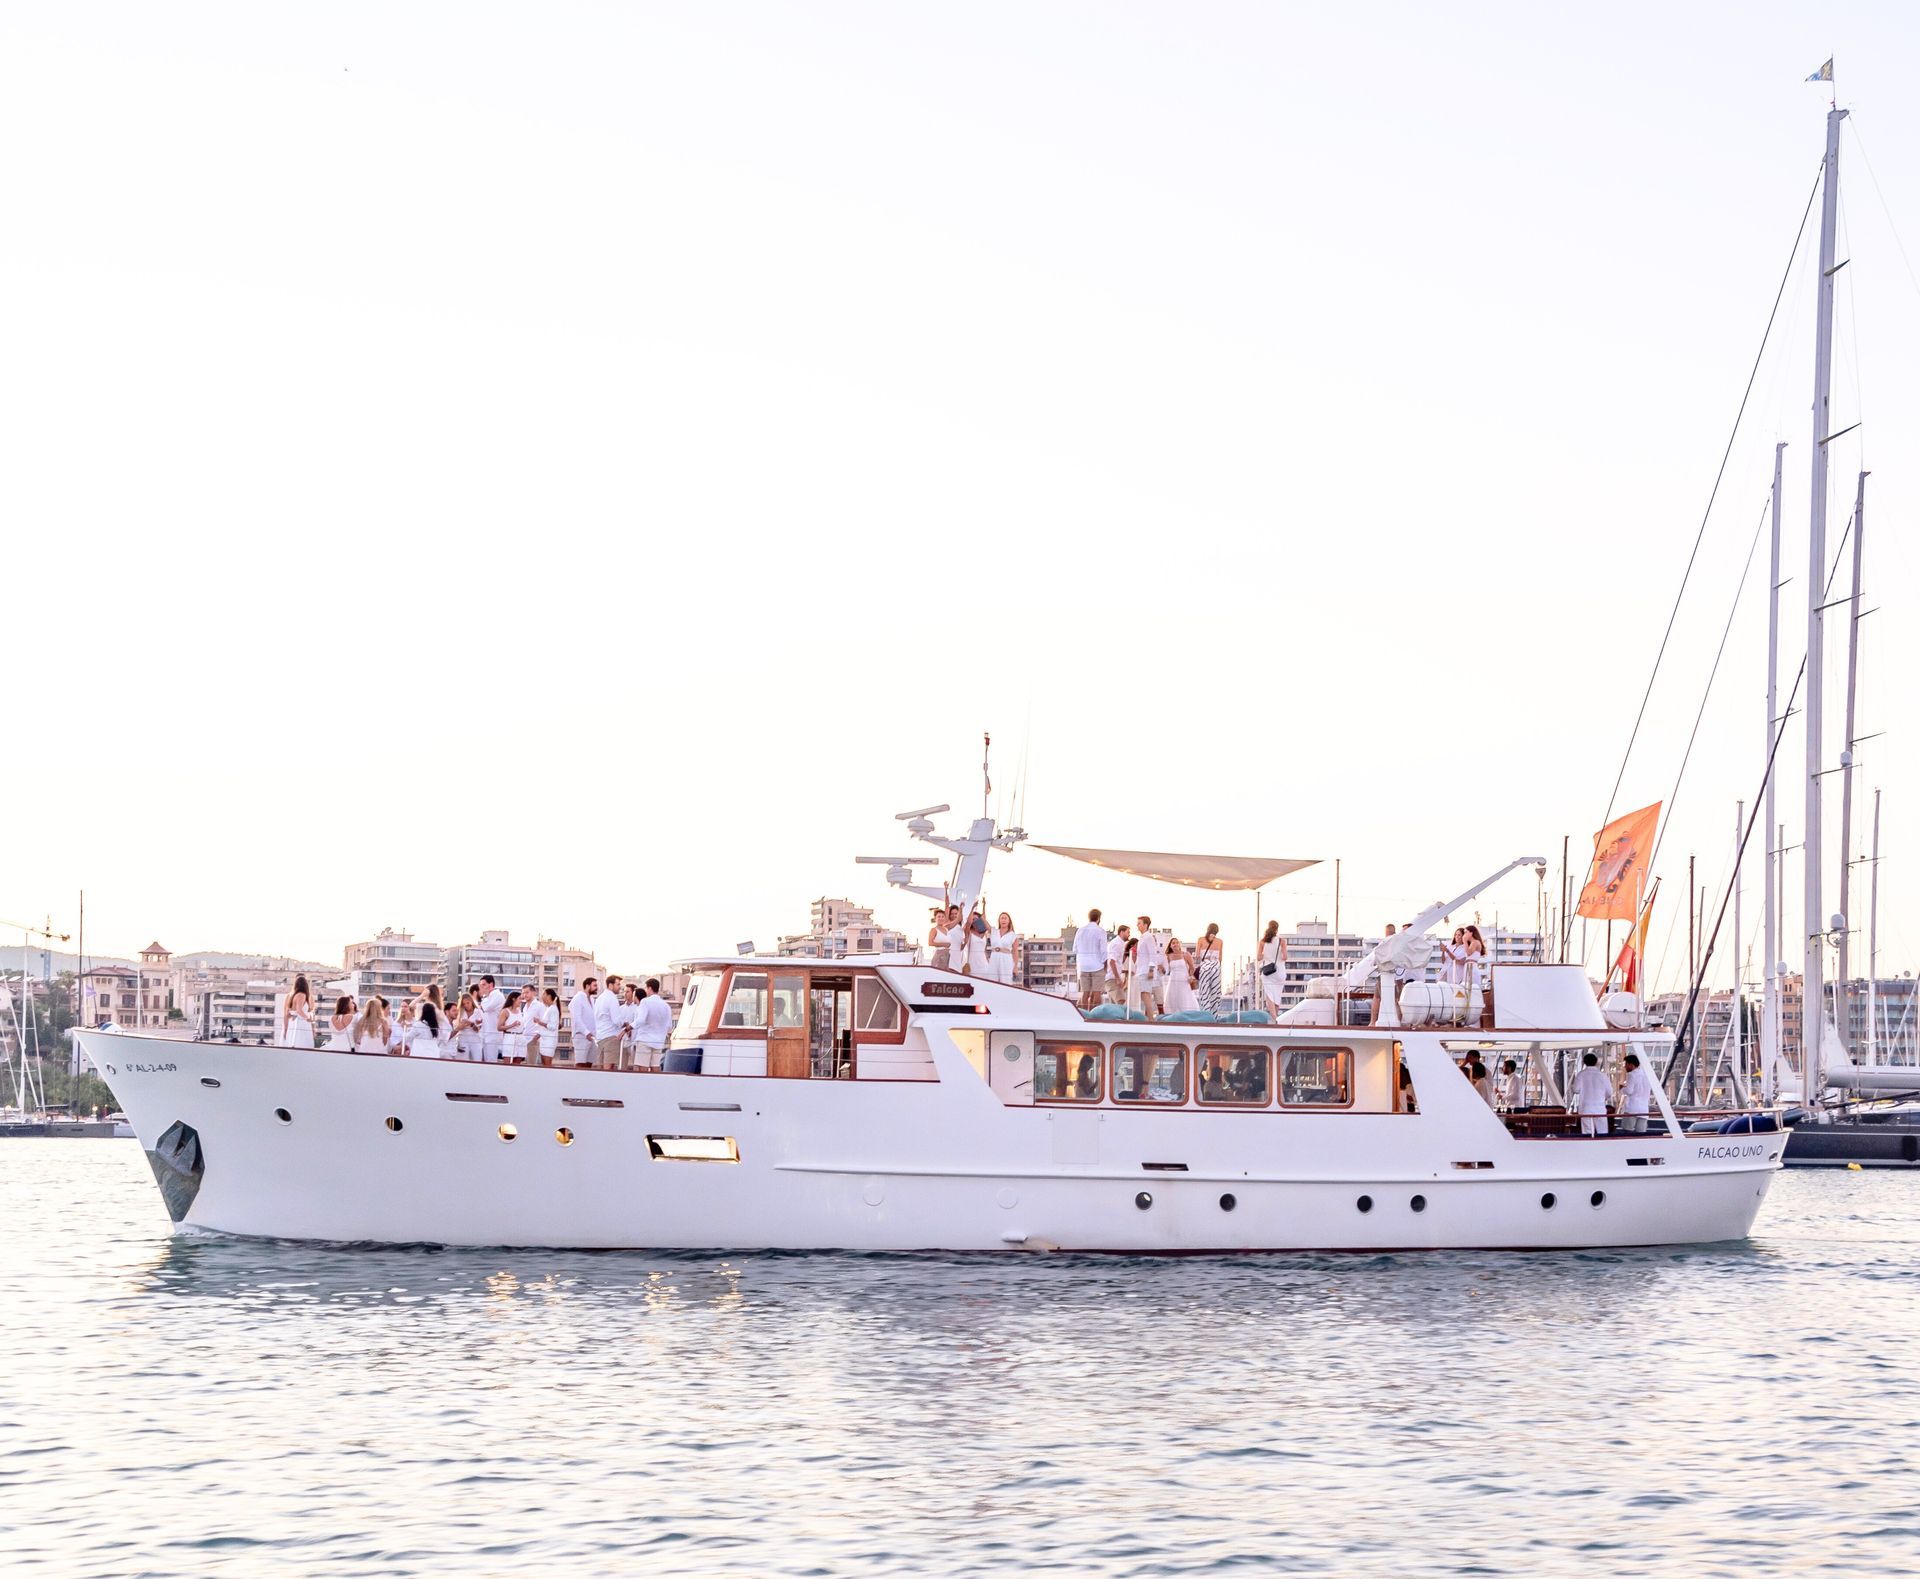 Image of the boat Falcao Uno with people on board for a celebration. Party and Wedding.